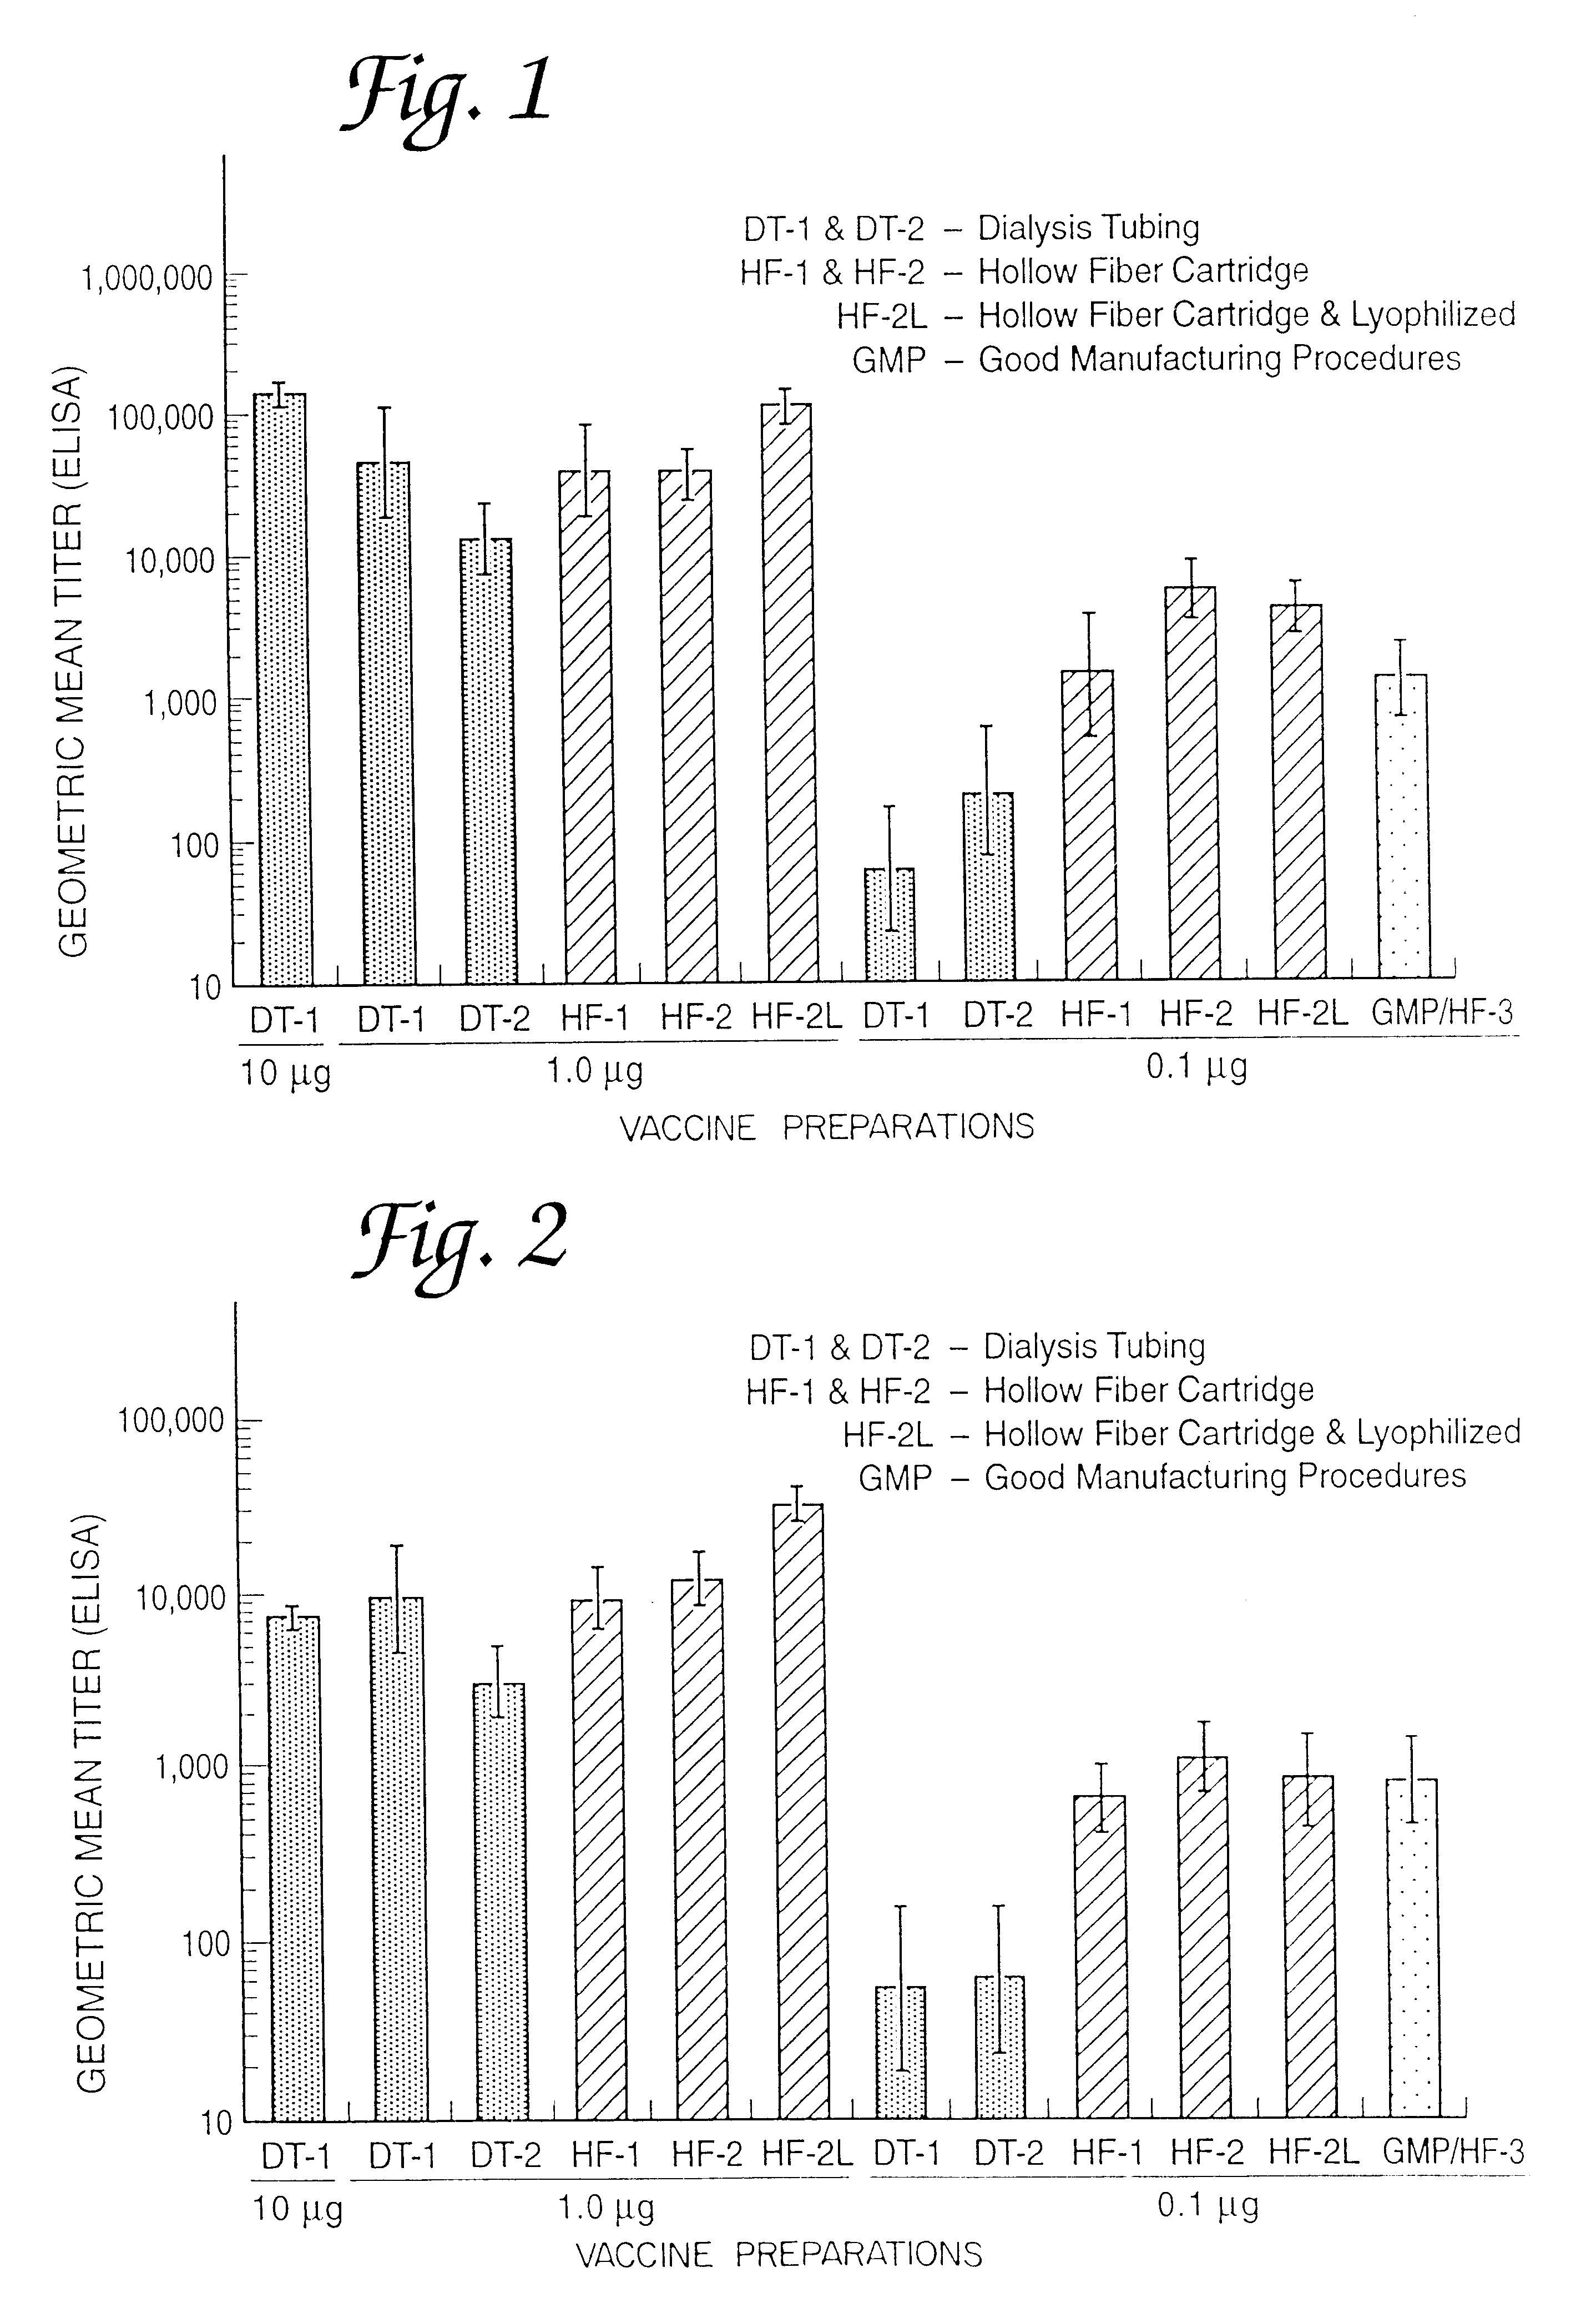 Methods for the production of non-covalently complexed and multivalent proteosome sub-unit vaccines